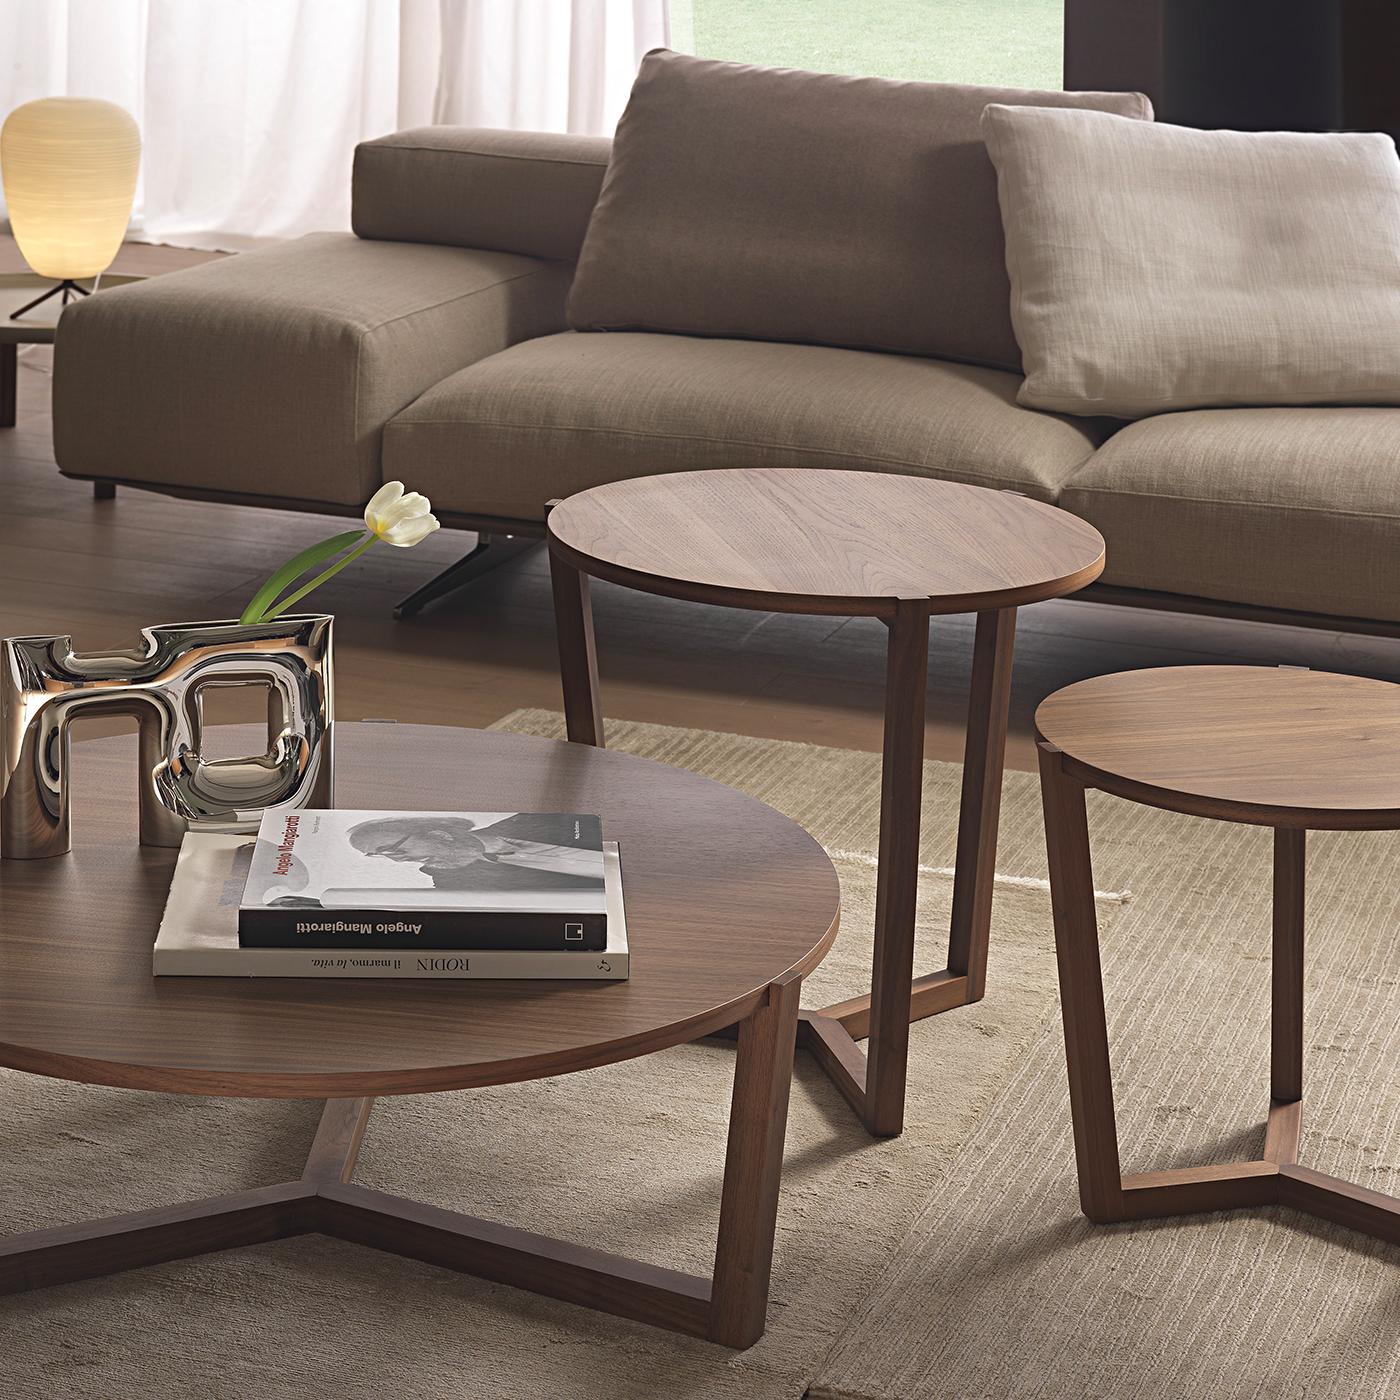 Entirely crafted of high-quality wood, this coffee table was designed to display sophistication and restraint in a minimal piece of furnishing. The rounded table top is veneered with precious Canaletto walnut wood and the three dainty legs